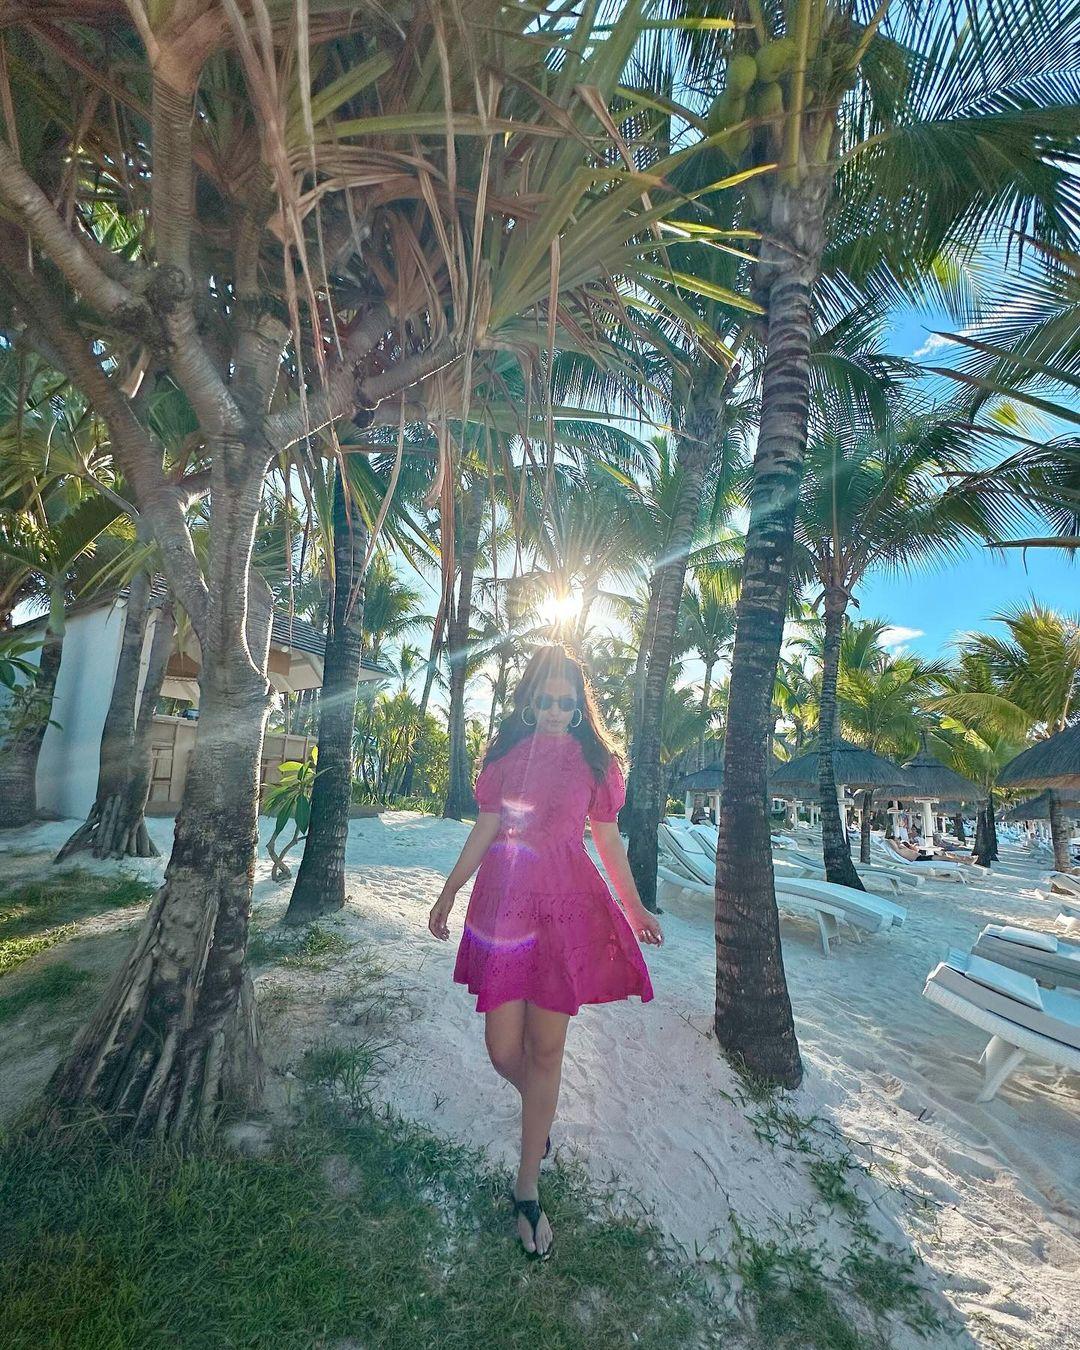 Planning a day out by the side of the beach? Then worry not, as Hina Khan's this pink mini dress is a must-have